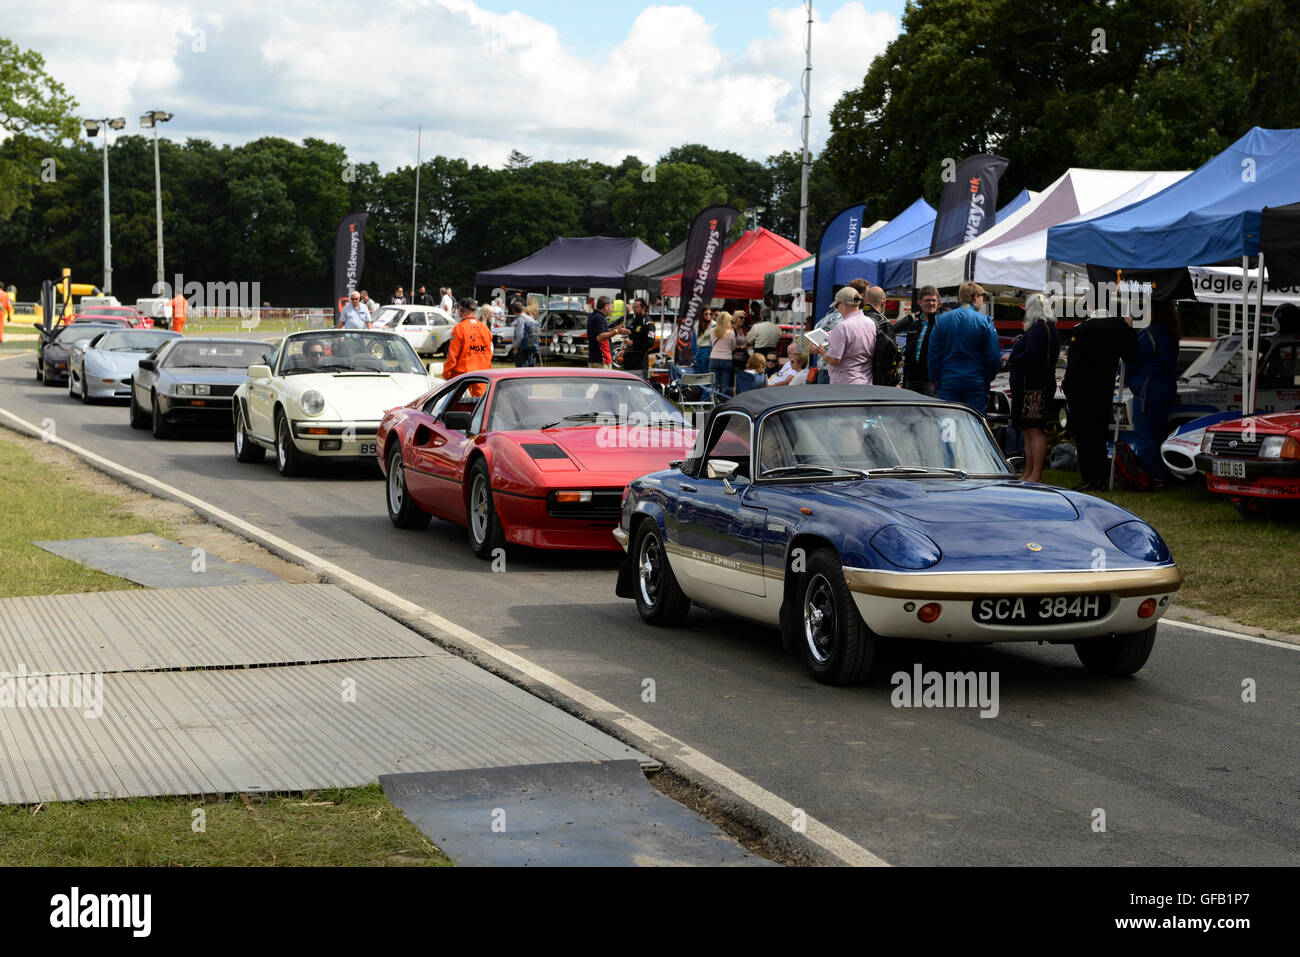 Carfest North, Bolesworth, Cheshire, UK. 31st July 2016. Cars line up to start a lap of the track being led by a Lotus Elan. The event is the brainchild of Chris Evans and features 3 days of cars, music and entertainment with profits being donated to the charity Children in Need. Andrew Paterson/Alamy Live News Stock Photo